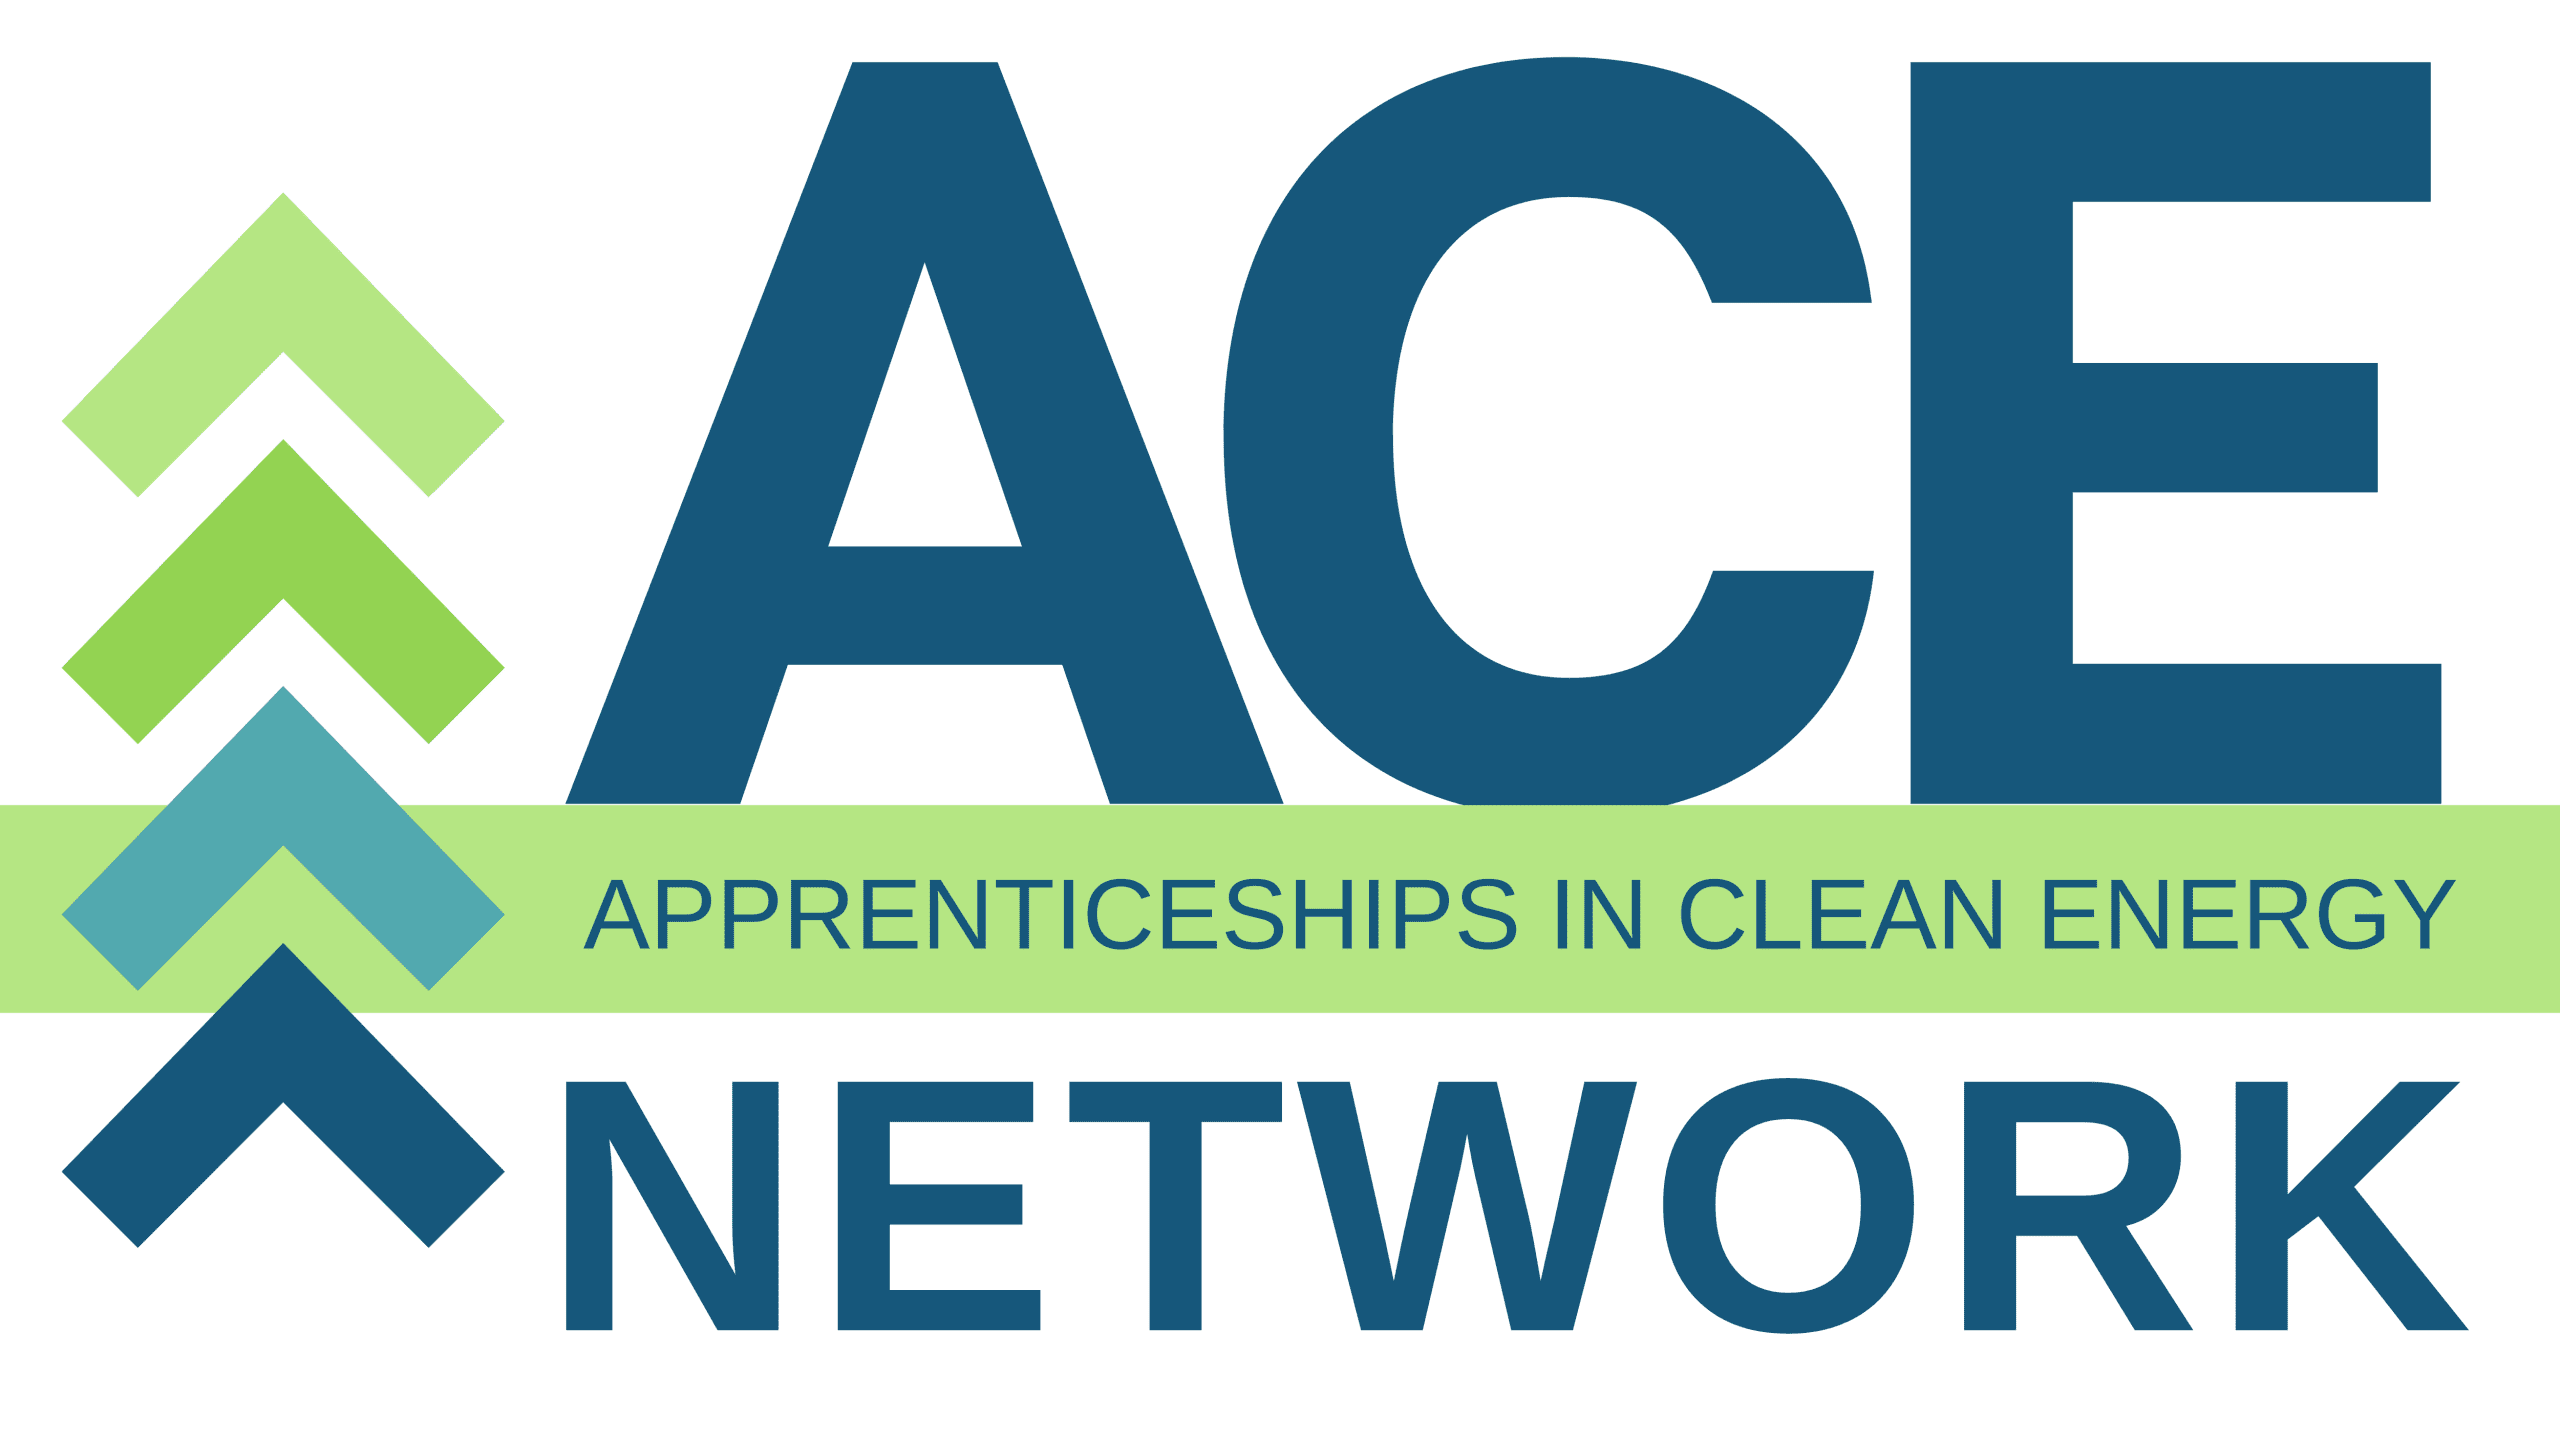 ACE Network logo - Apprenticeships in Clean Energy